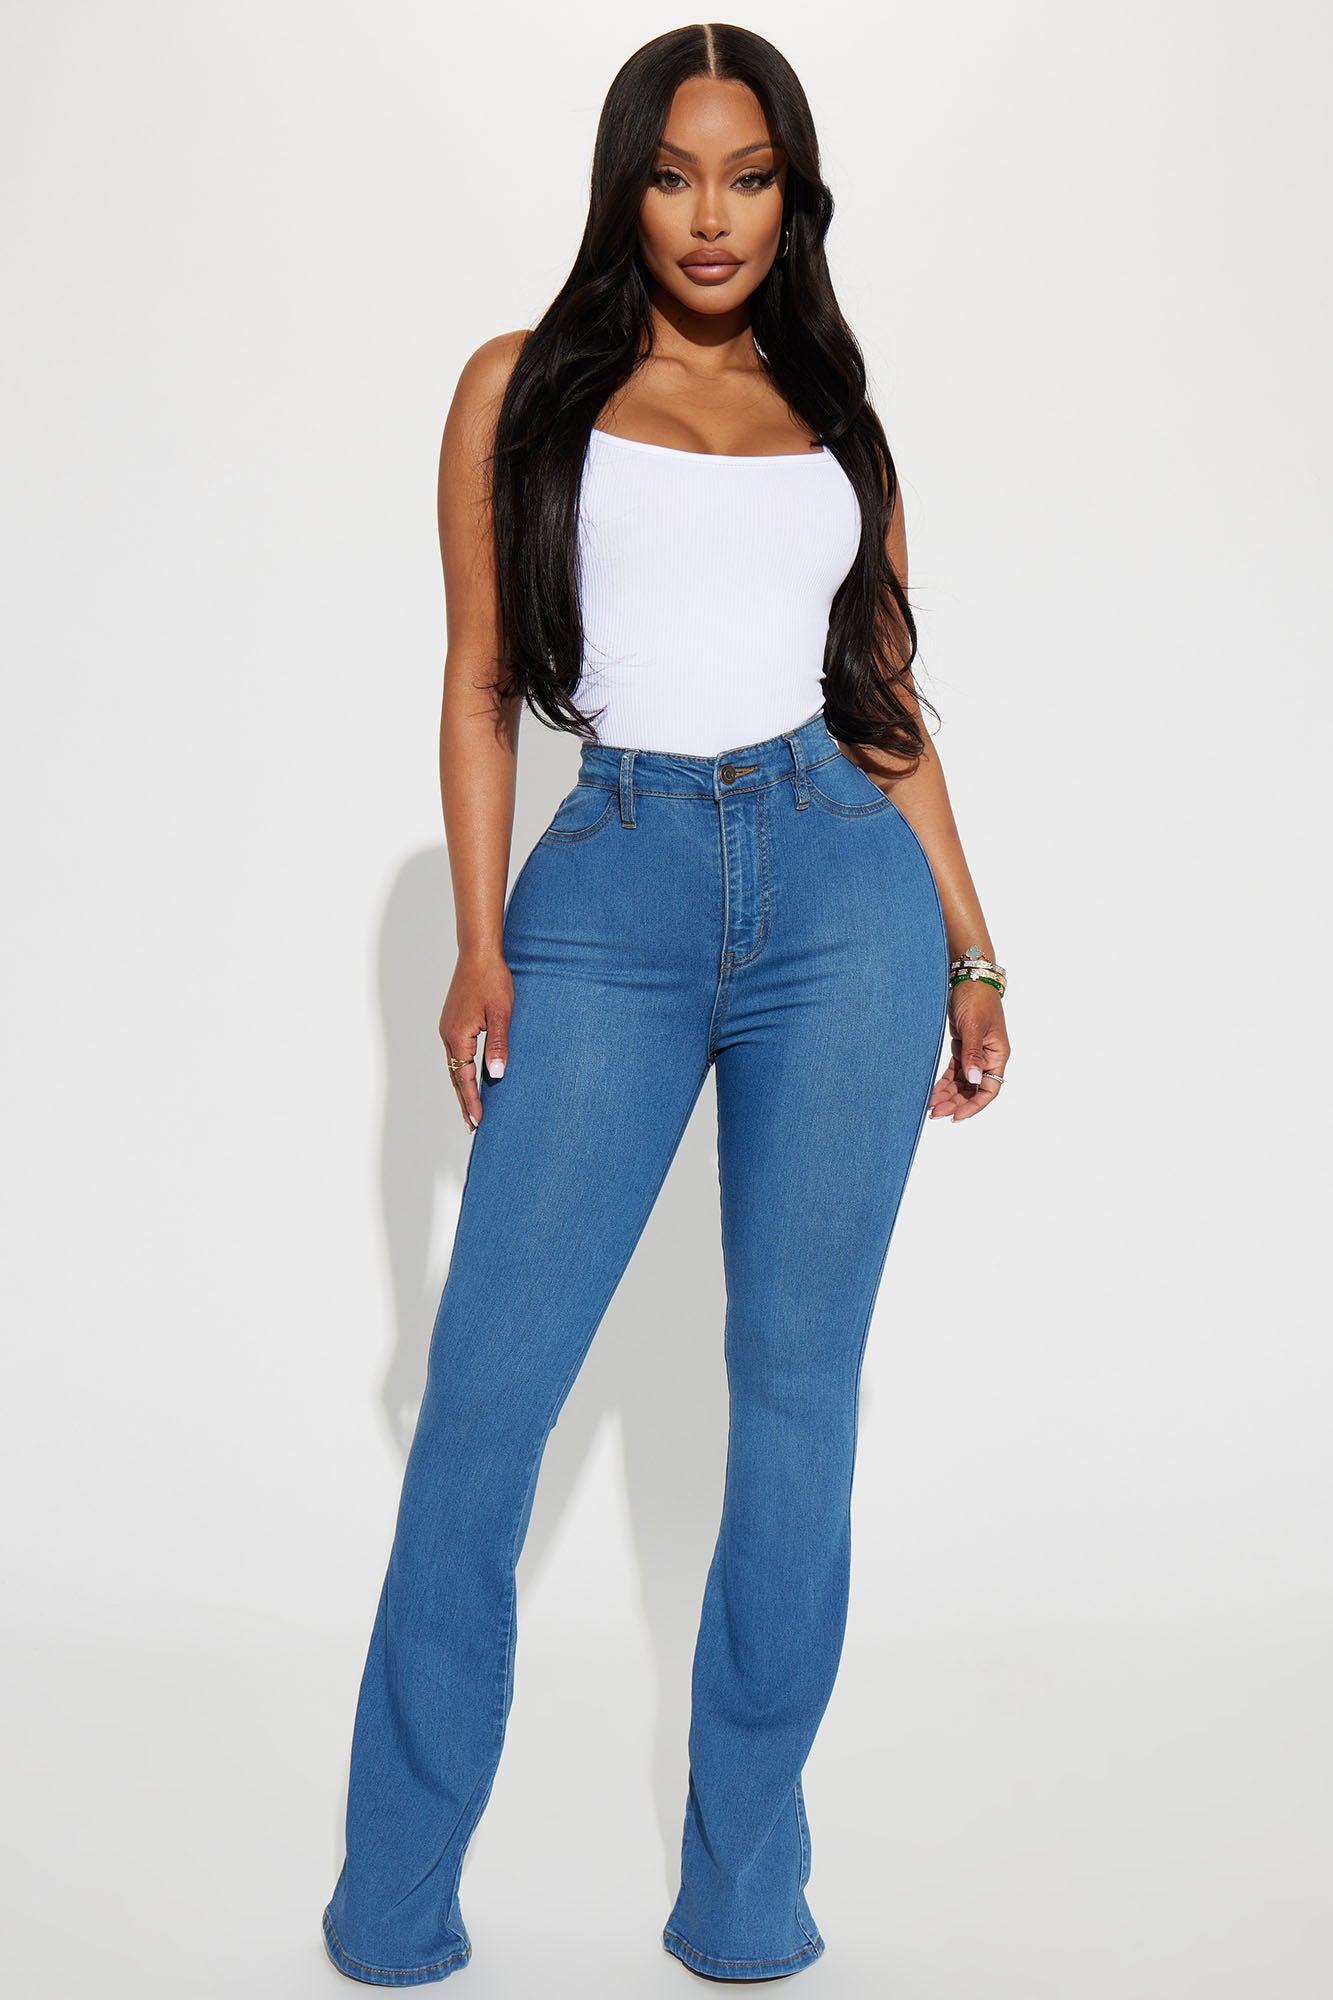 Bell Bottom Jeans – The Iconic 70s Jean Style and Heritage - ZEVA DENIM